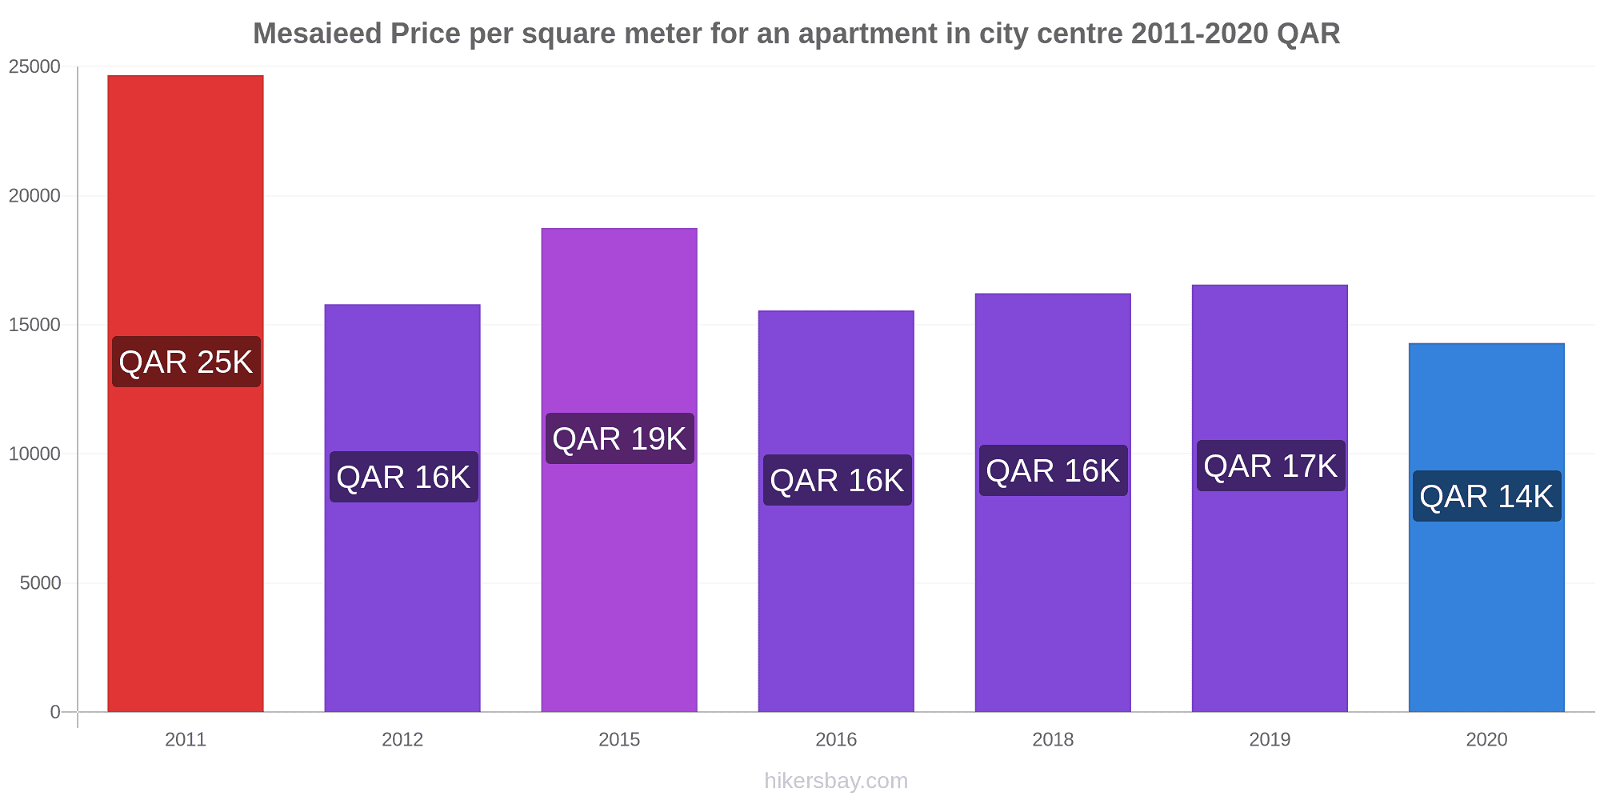 Mesaieed price changes Price per square meter for an apartment in city centre hikersbay.com